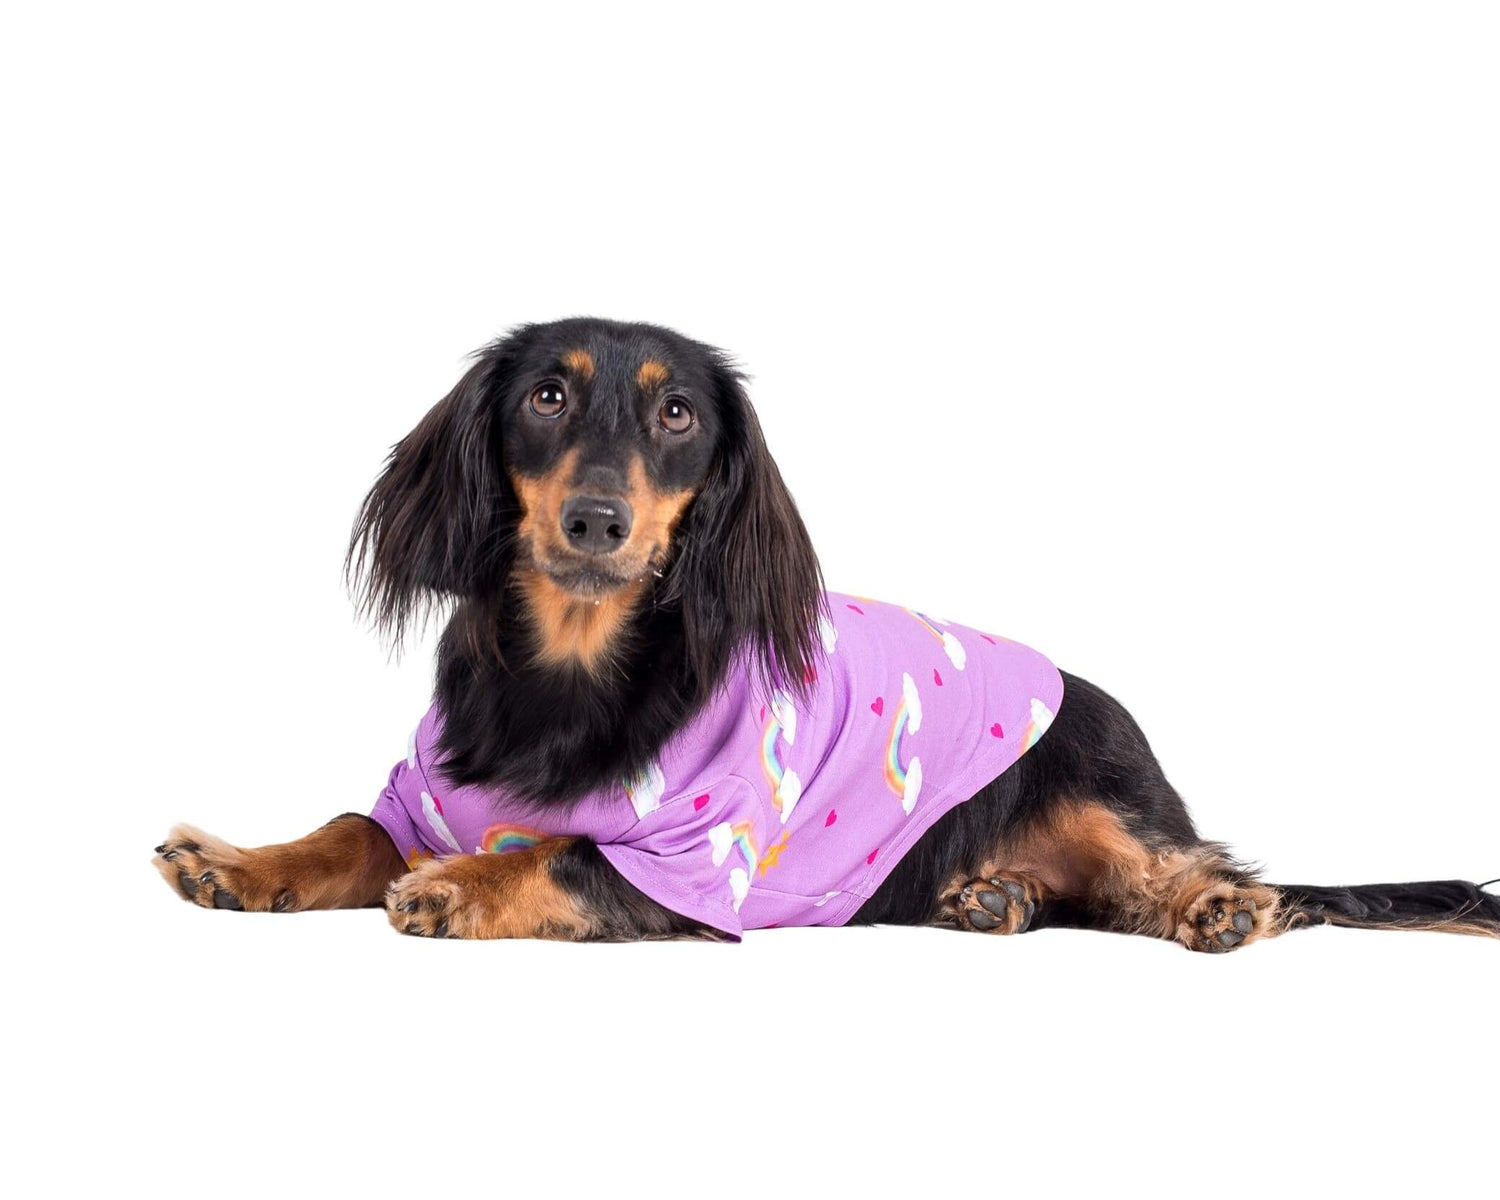 Ellie the Dachshund layng down wearing Vibrant Hound's Chasing Rainbow dog pyjama. The dog shirt is purple with rainbows, bright suns, and love hearts printed on it.